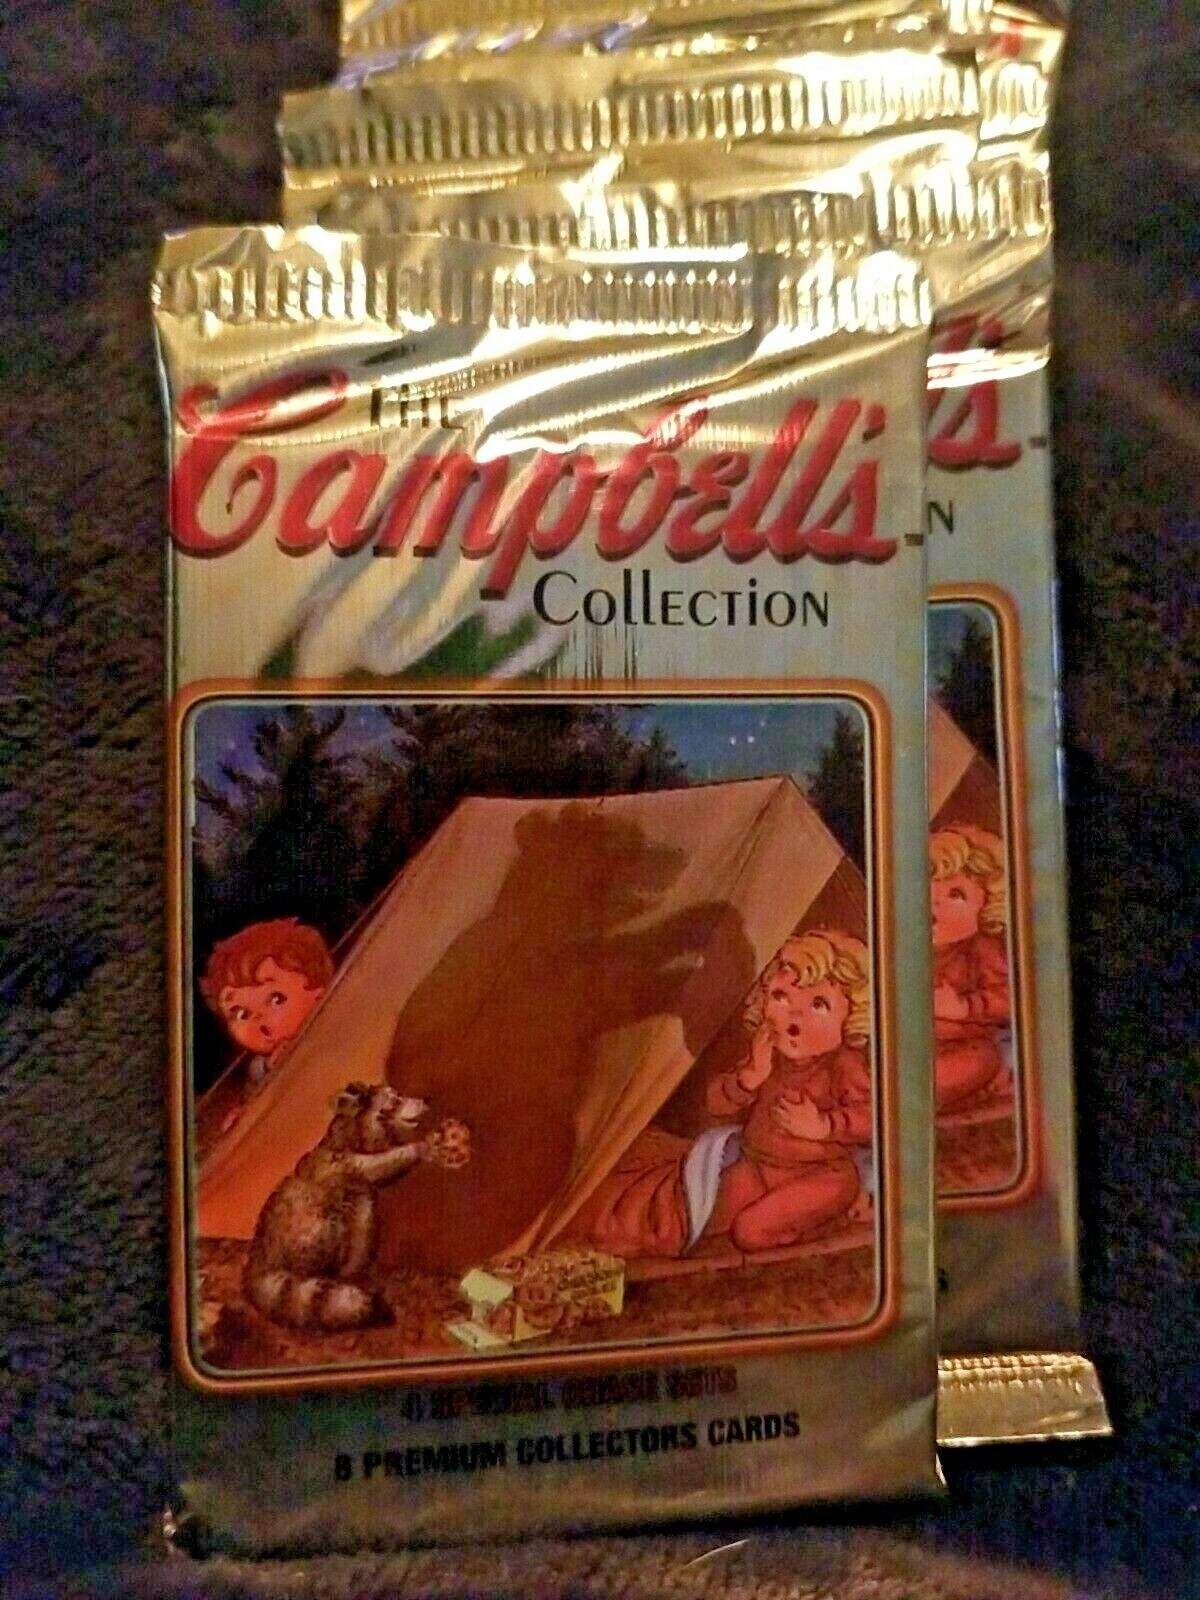 1995 THE CAMBELLS SOUP Collection Trading Cards (Löspaket)